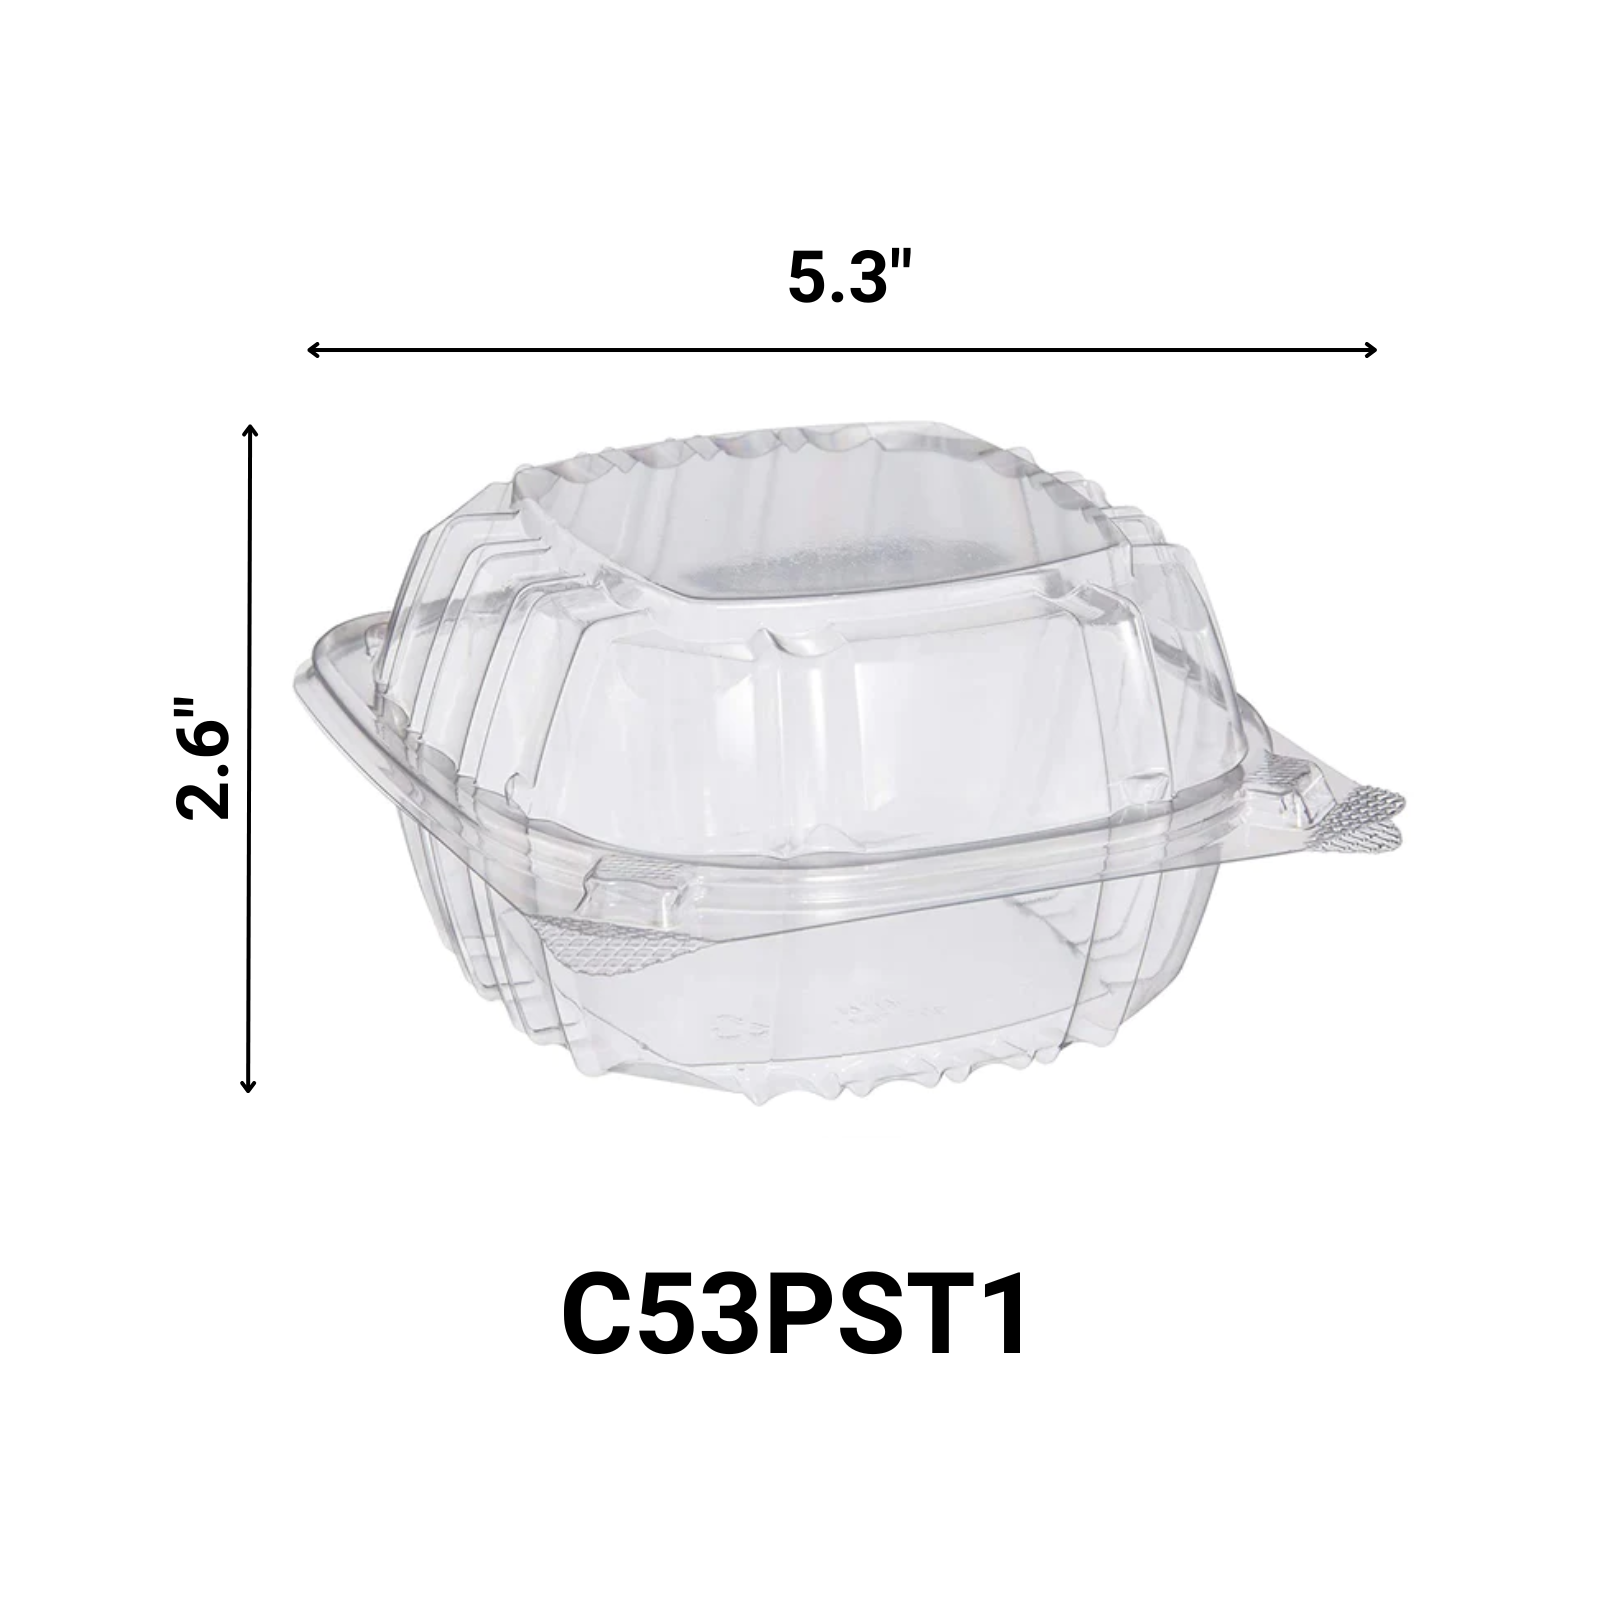 *WHOLESALE* DART Model # C53PST1| ClearSeal Hinged Lid Container | 500 ct/case Salad Containers Dart   